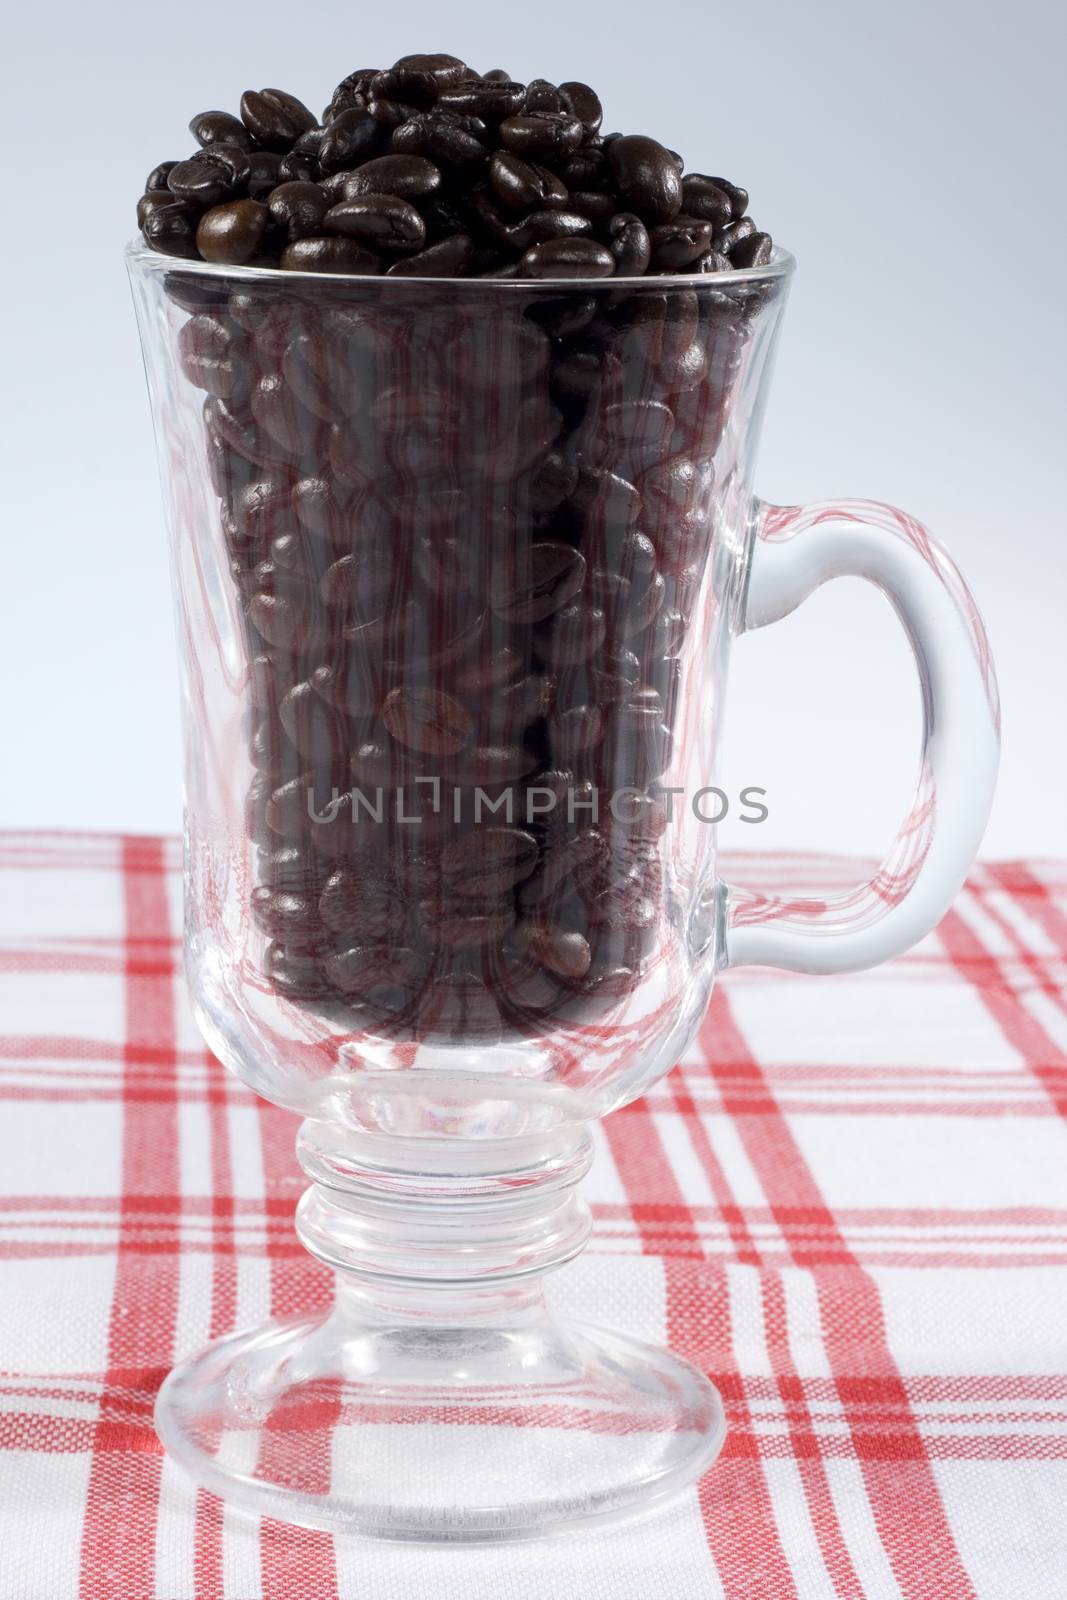 a cup full of coffee beans